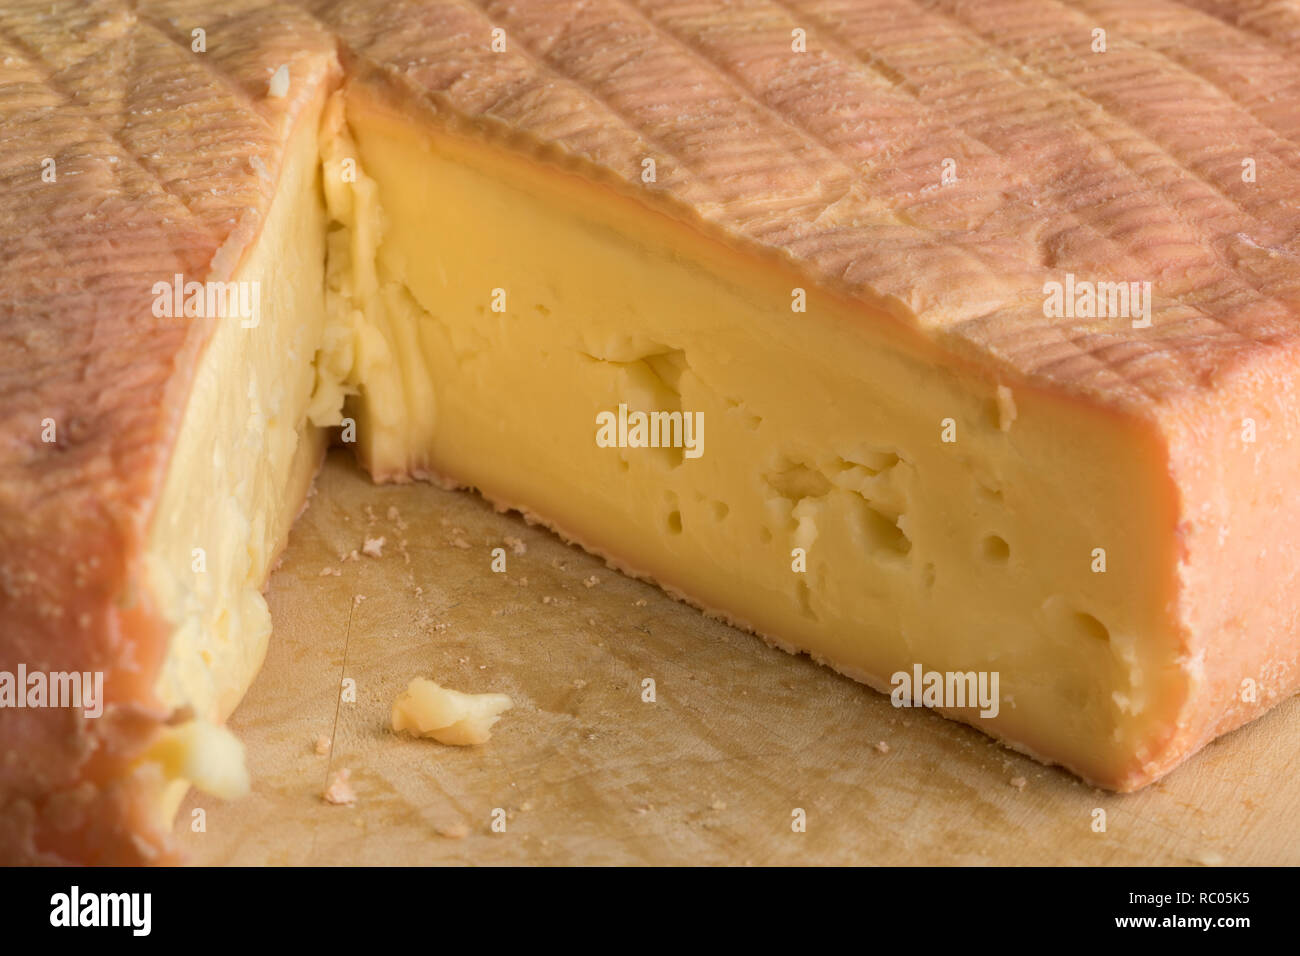 Piece of French creamy delicious Munster cheese closeup Stock Photo